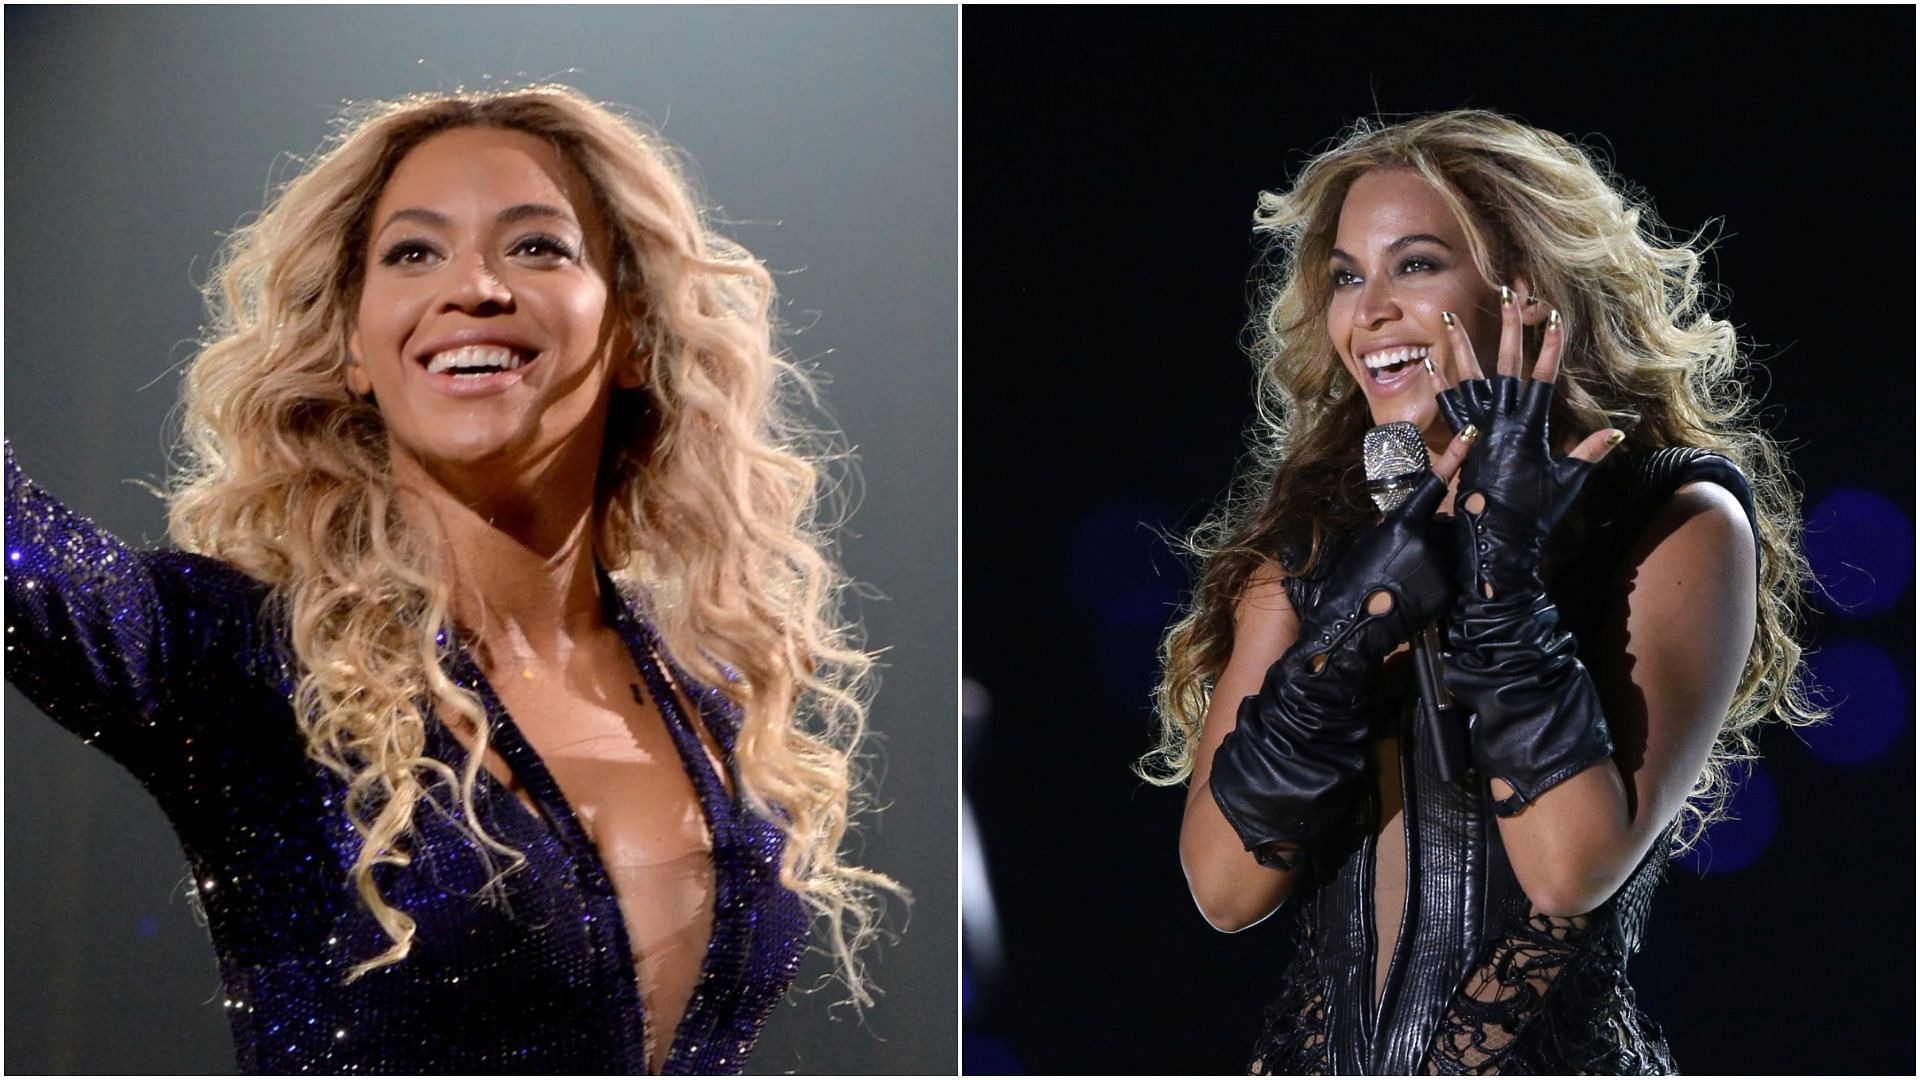 Beyonce has announced her new album after 6 years. (Images via Getty)